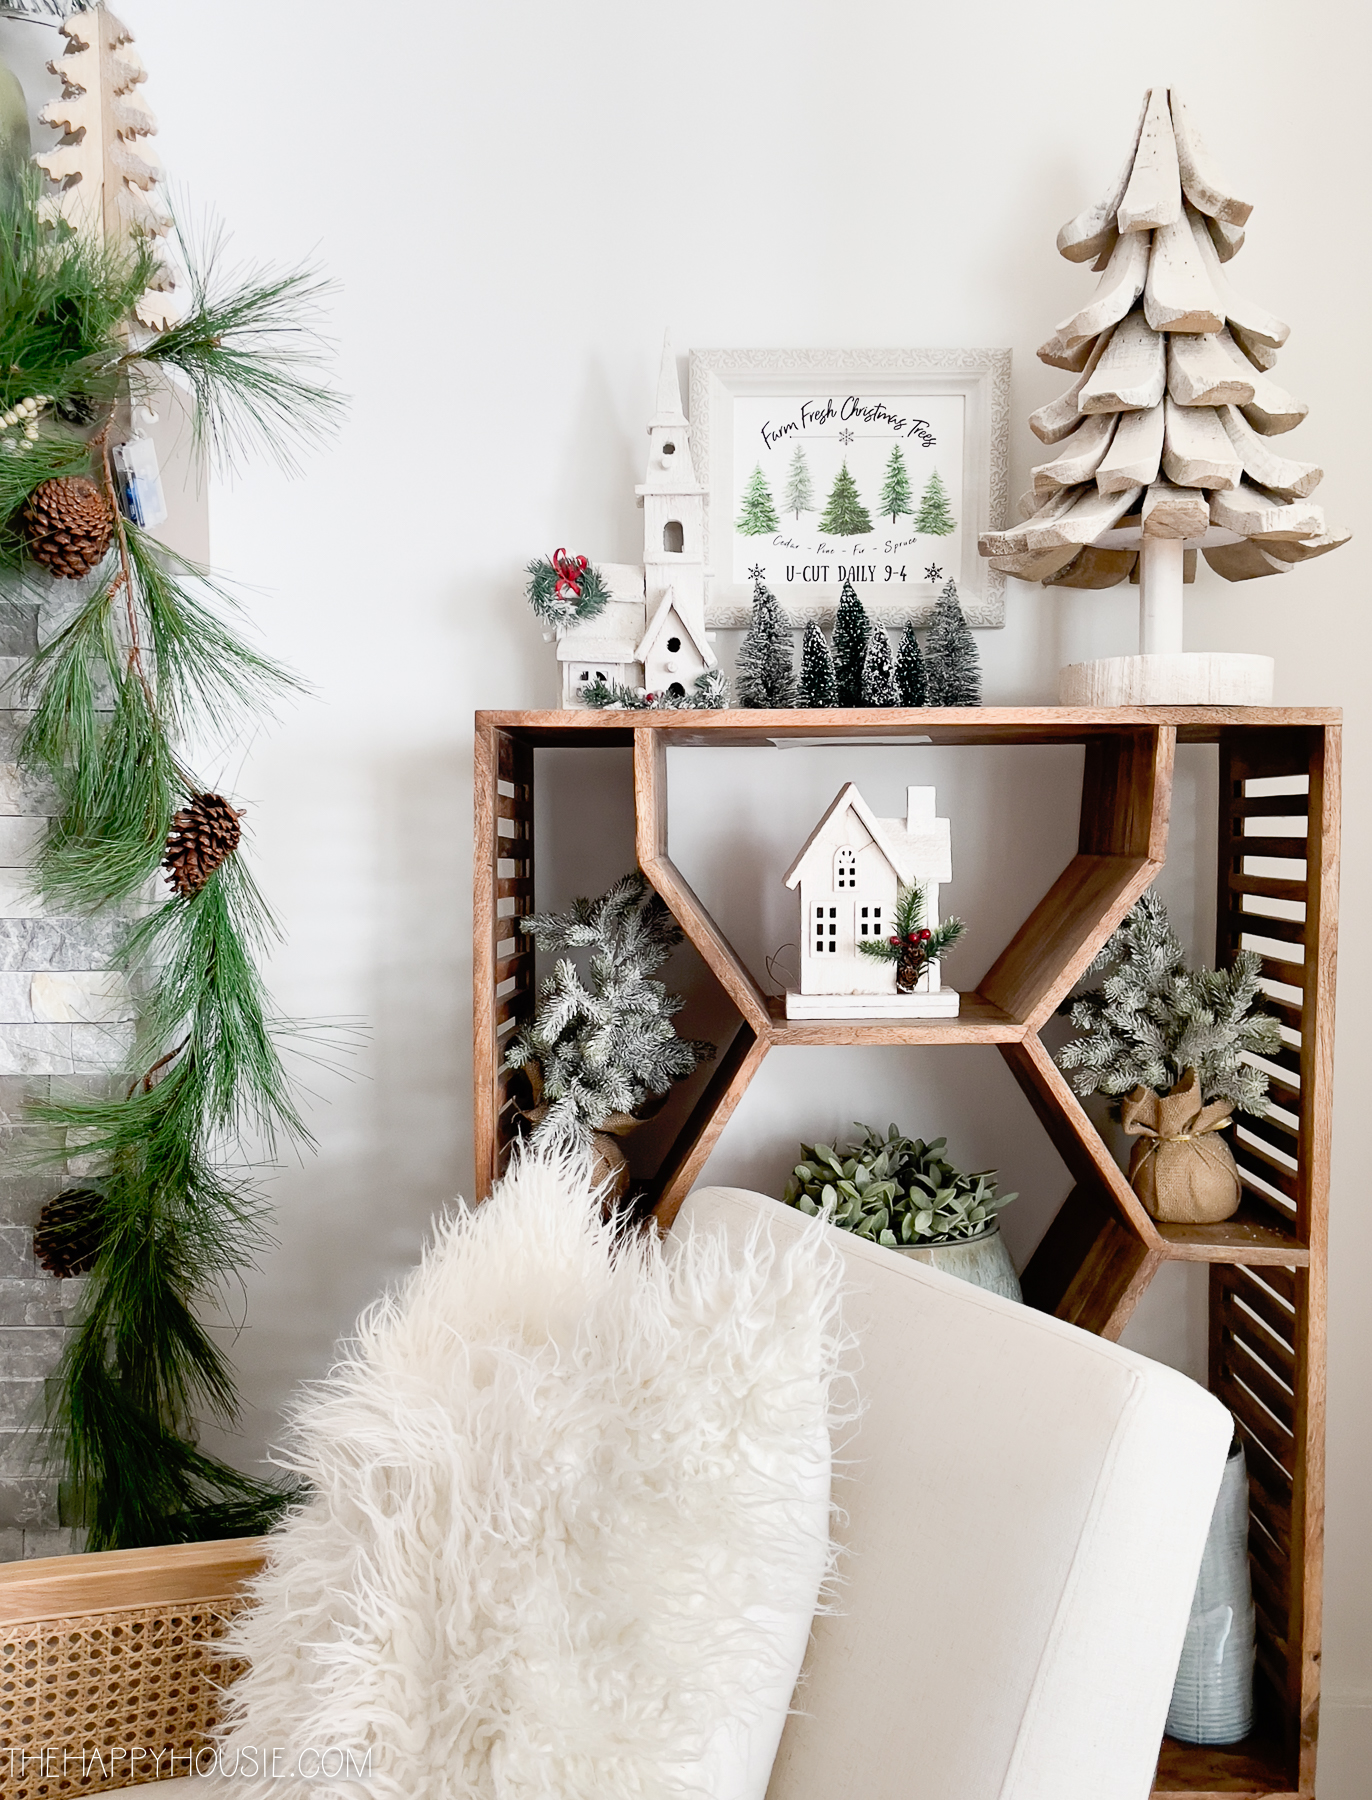 A wooden shelf with Christmas items on it.